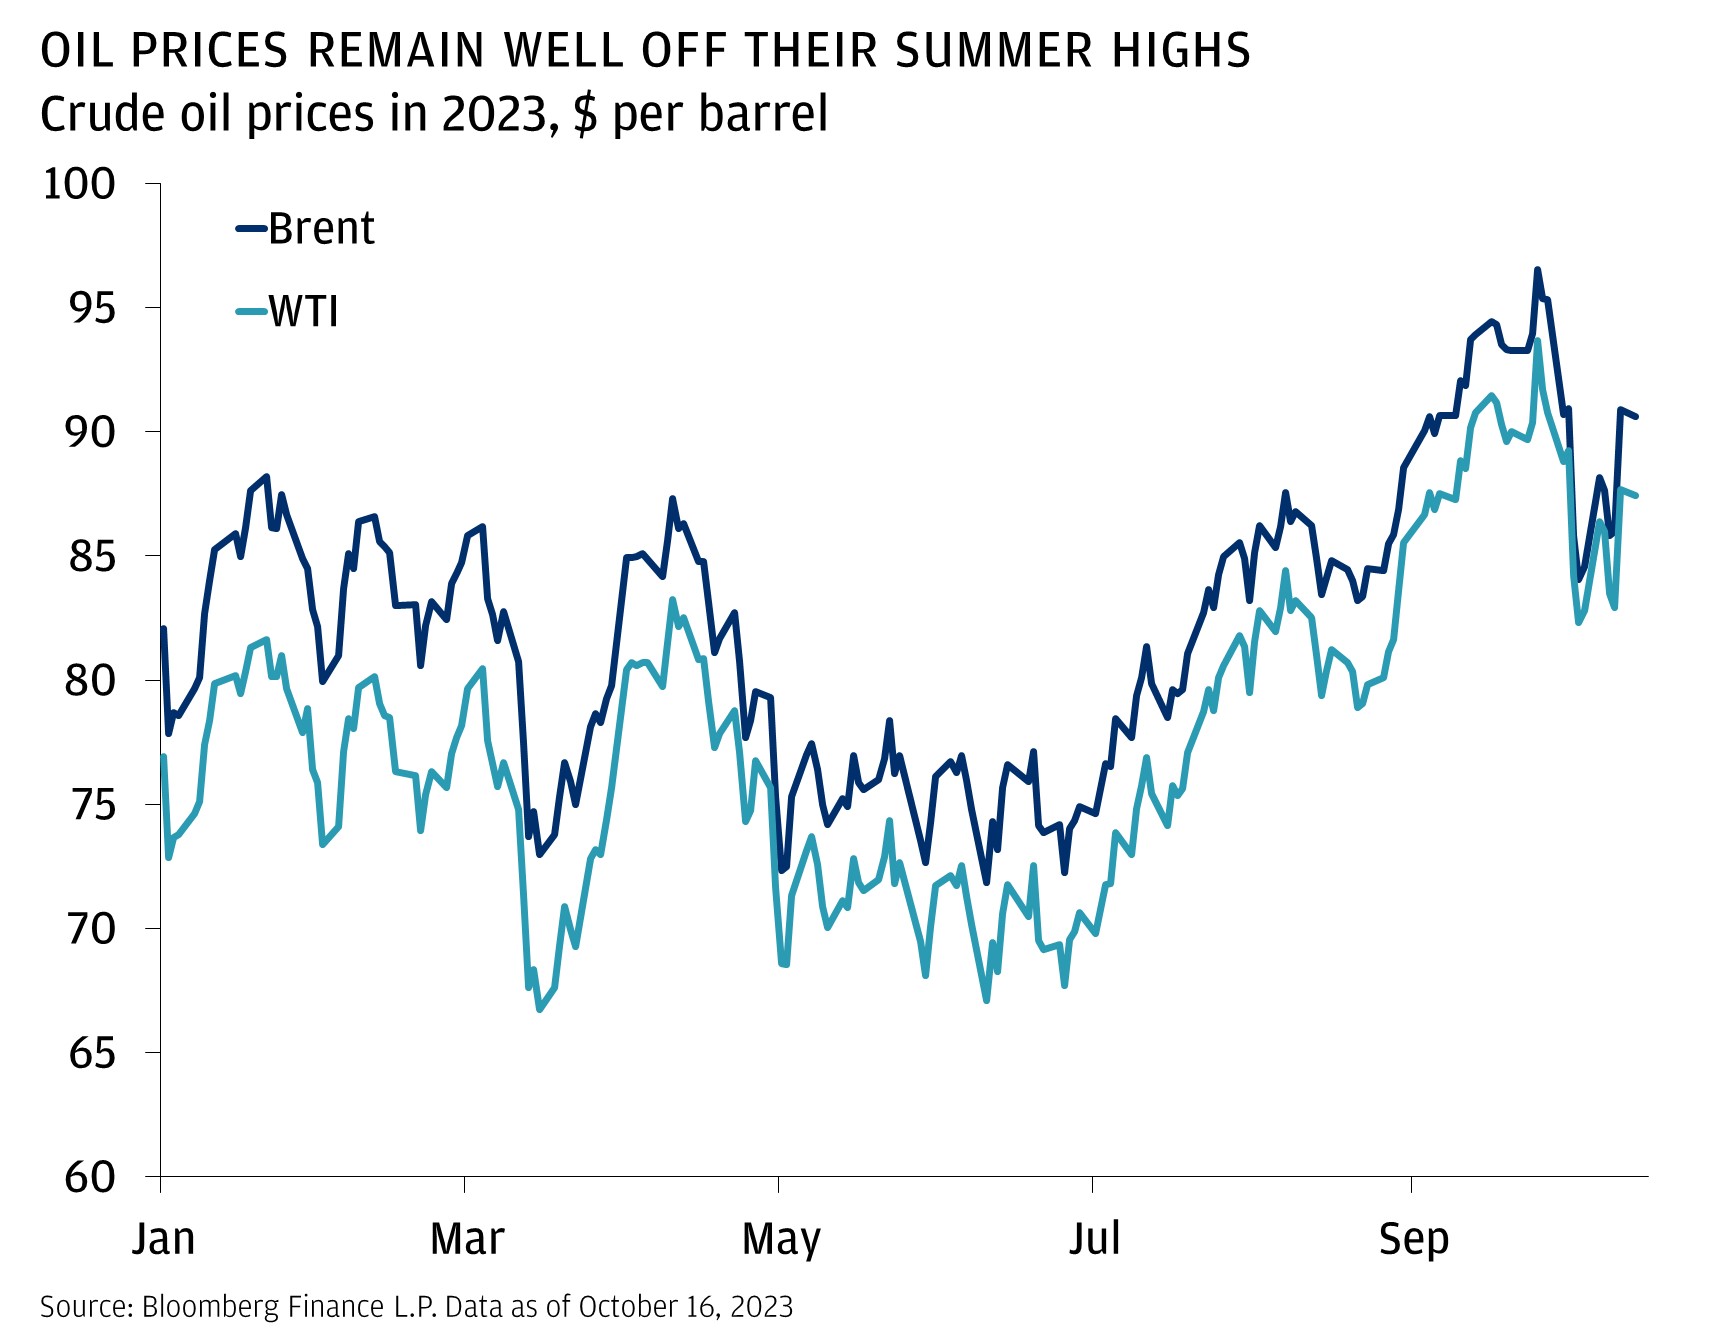 OIL PRICES REMAIN WELL OFF THEIR SUMMER HIGHS